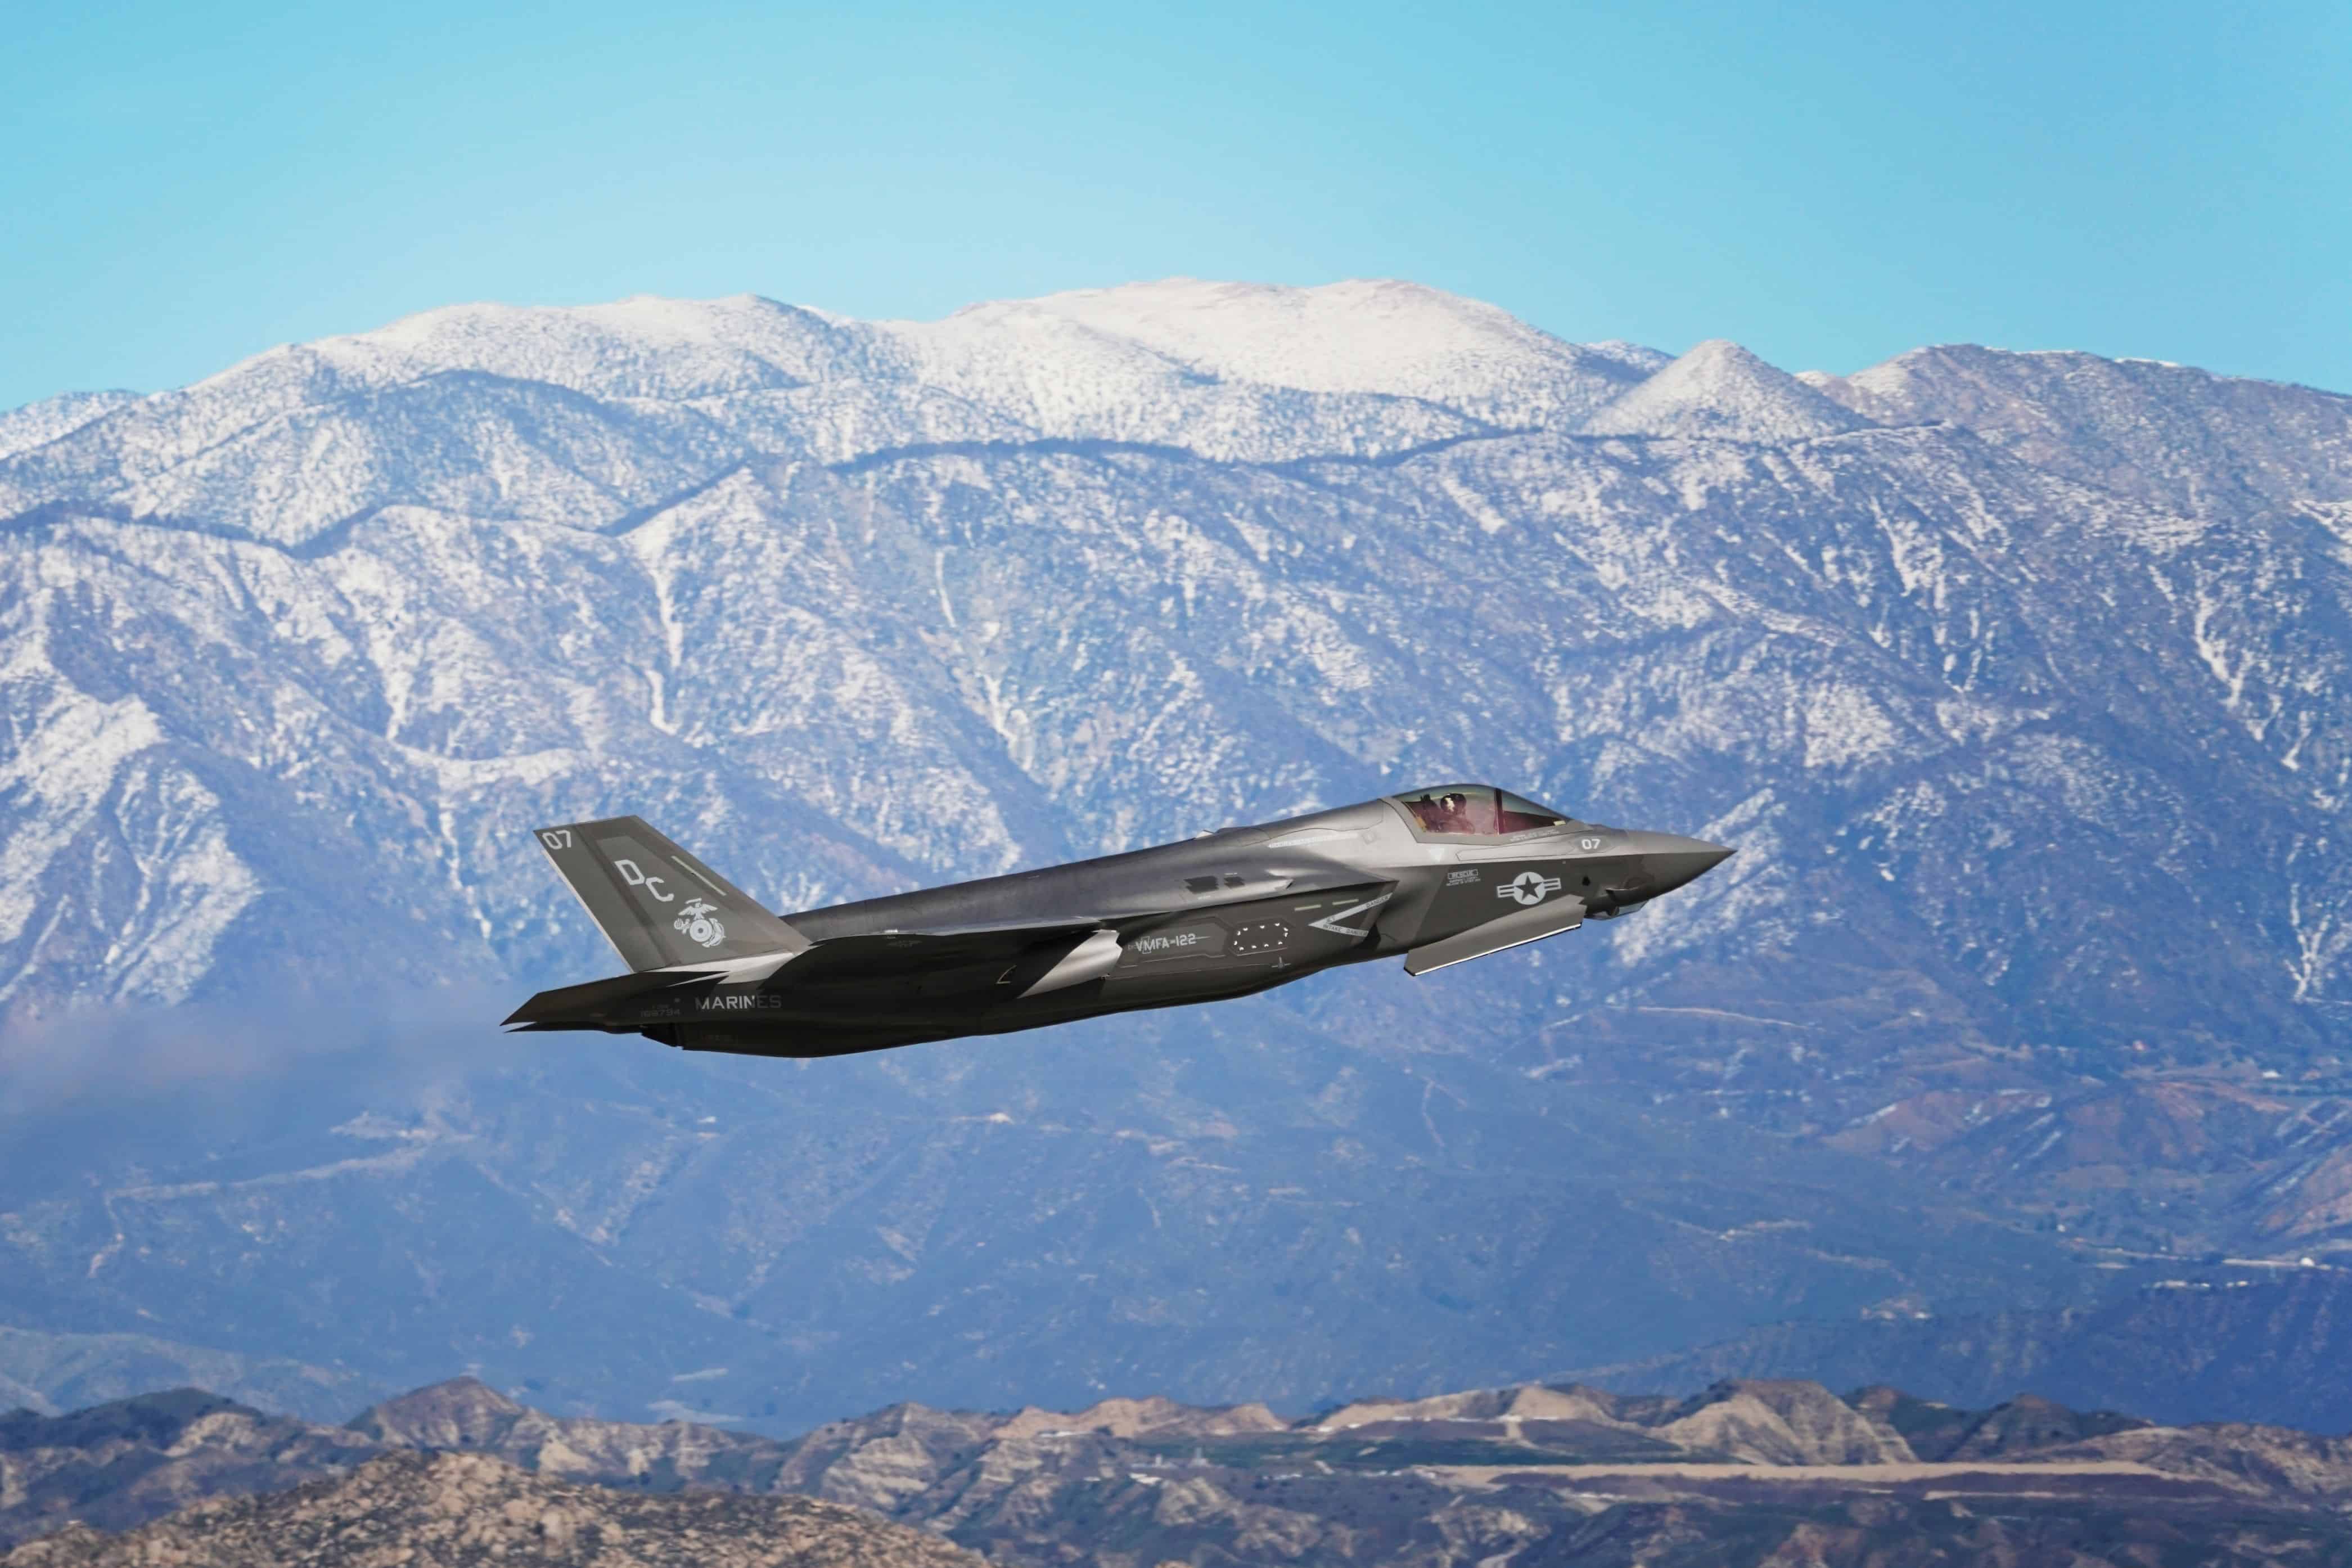 Moreno Valley, California - Feb 27, 2022: US Marine Corps Lockheed Martin F-35 departing from March ARB.